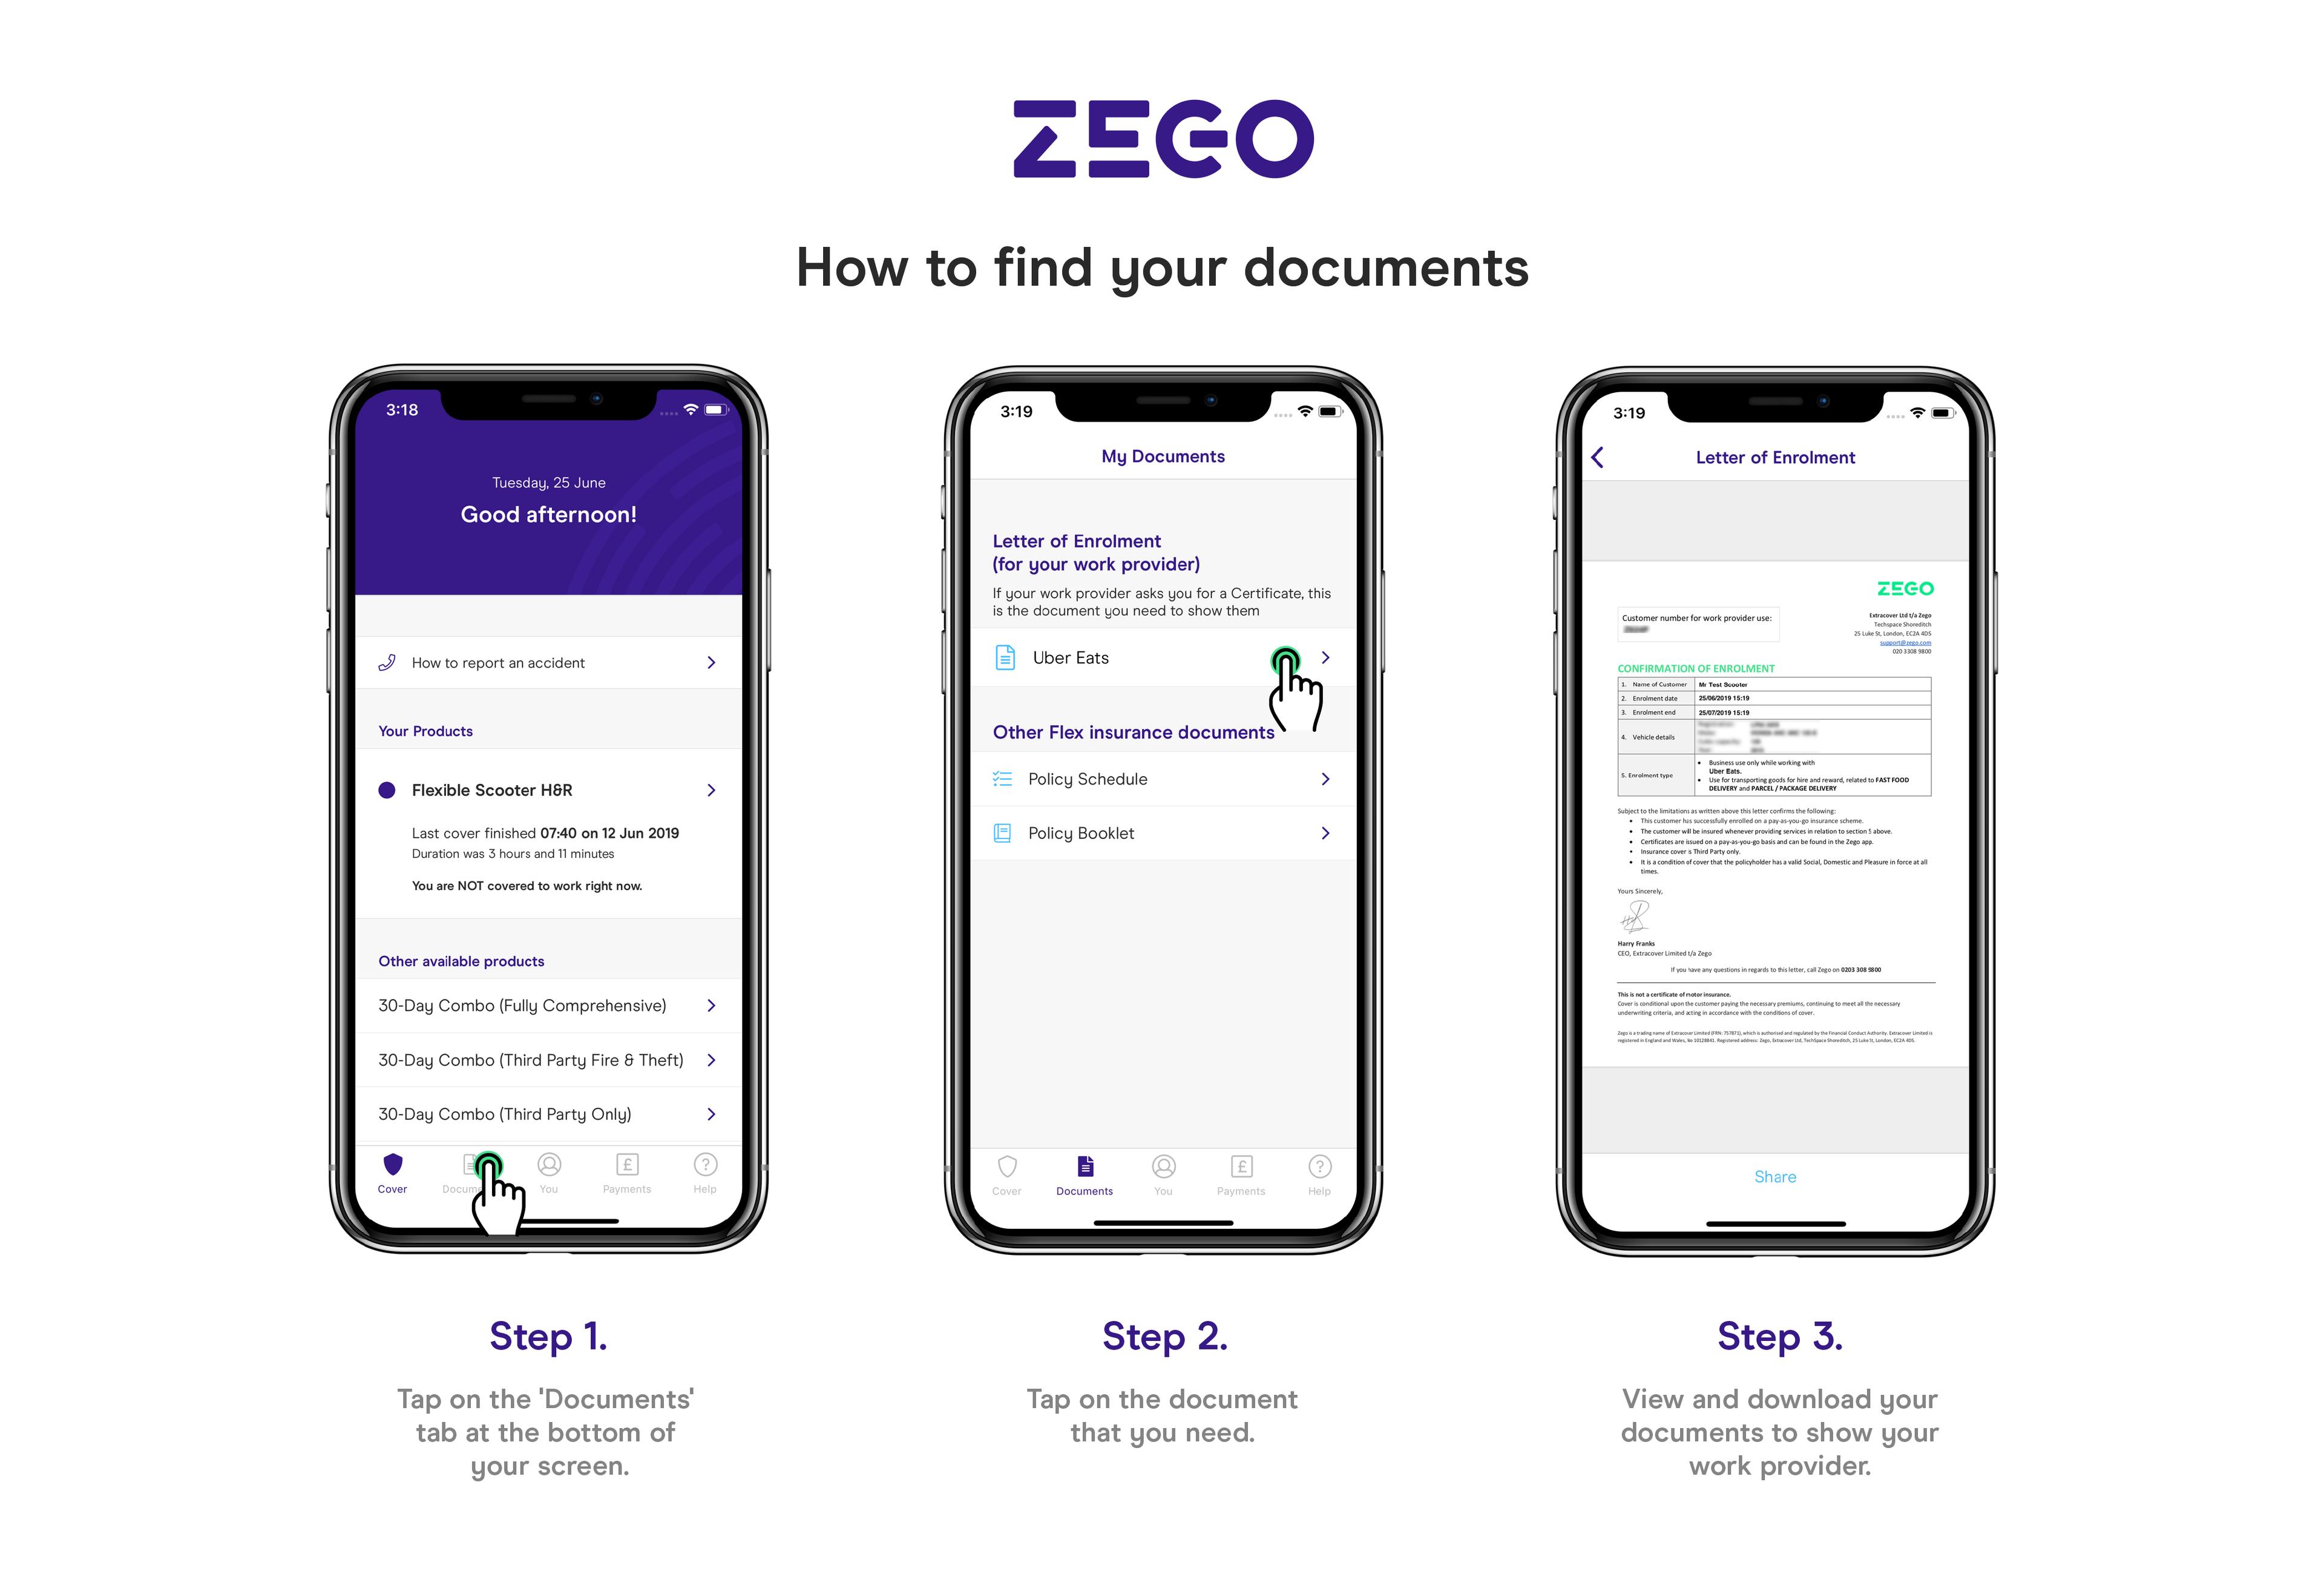 We've made it easier to find your documents!